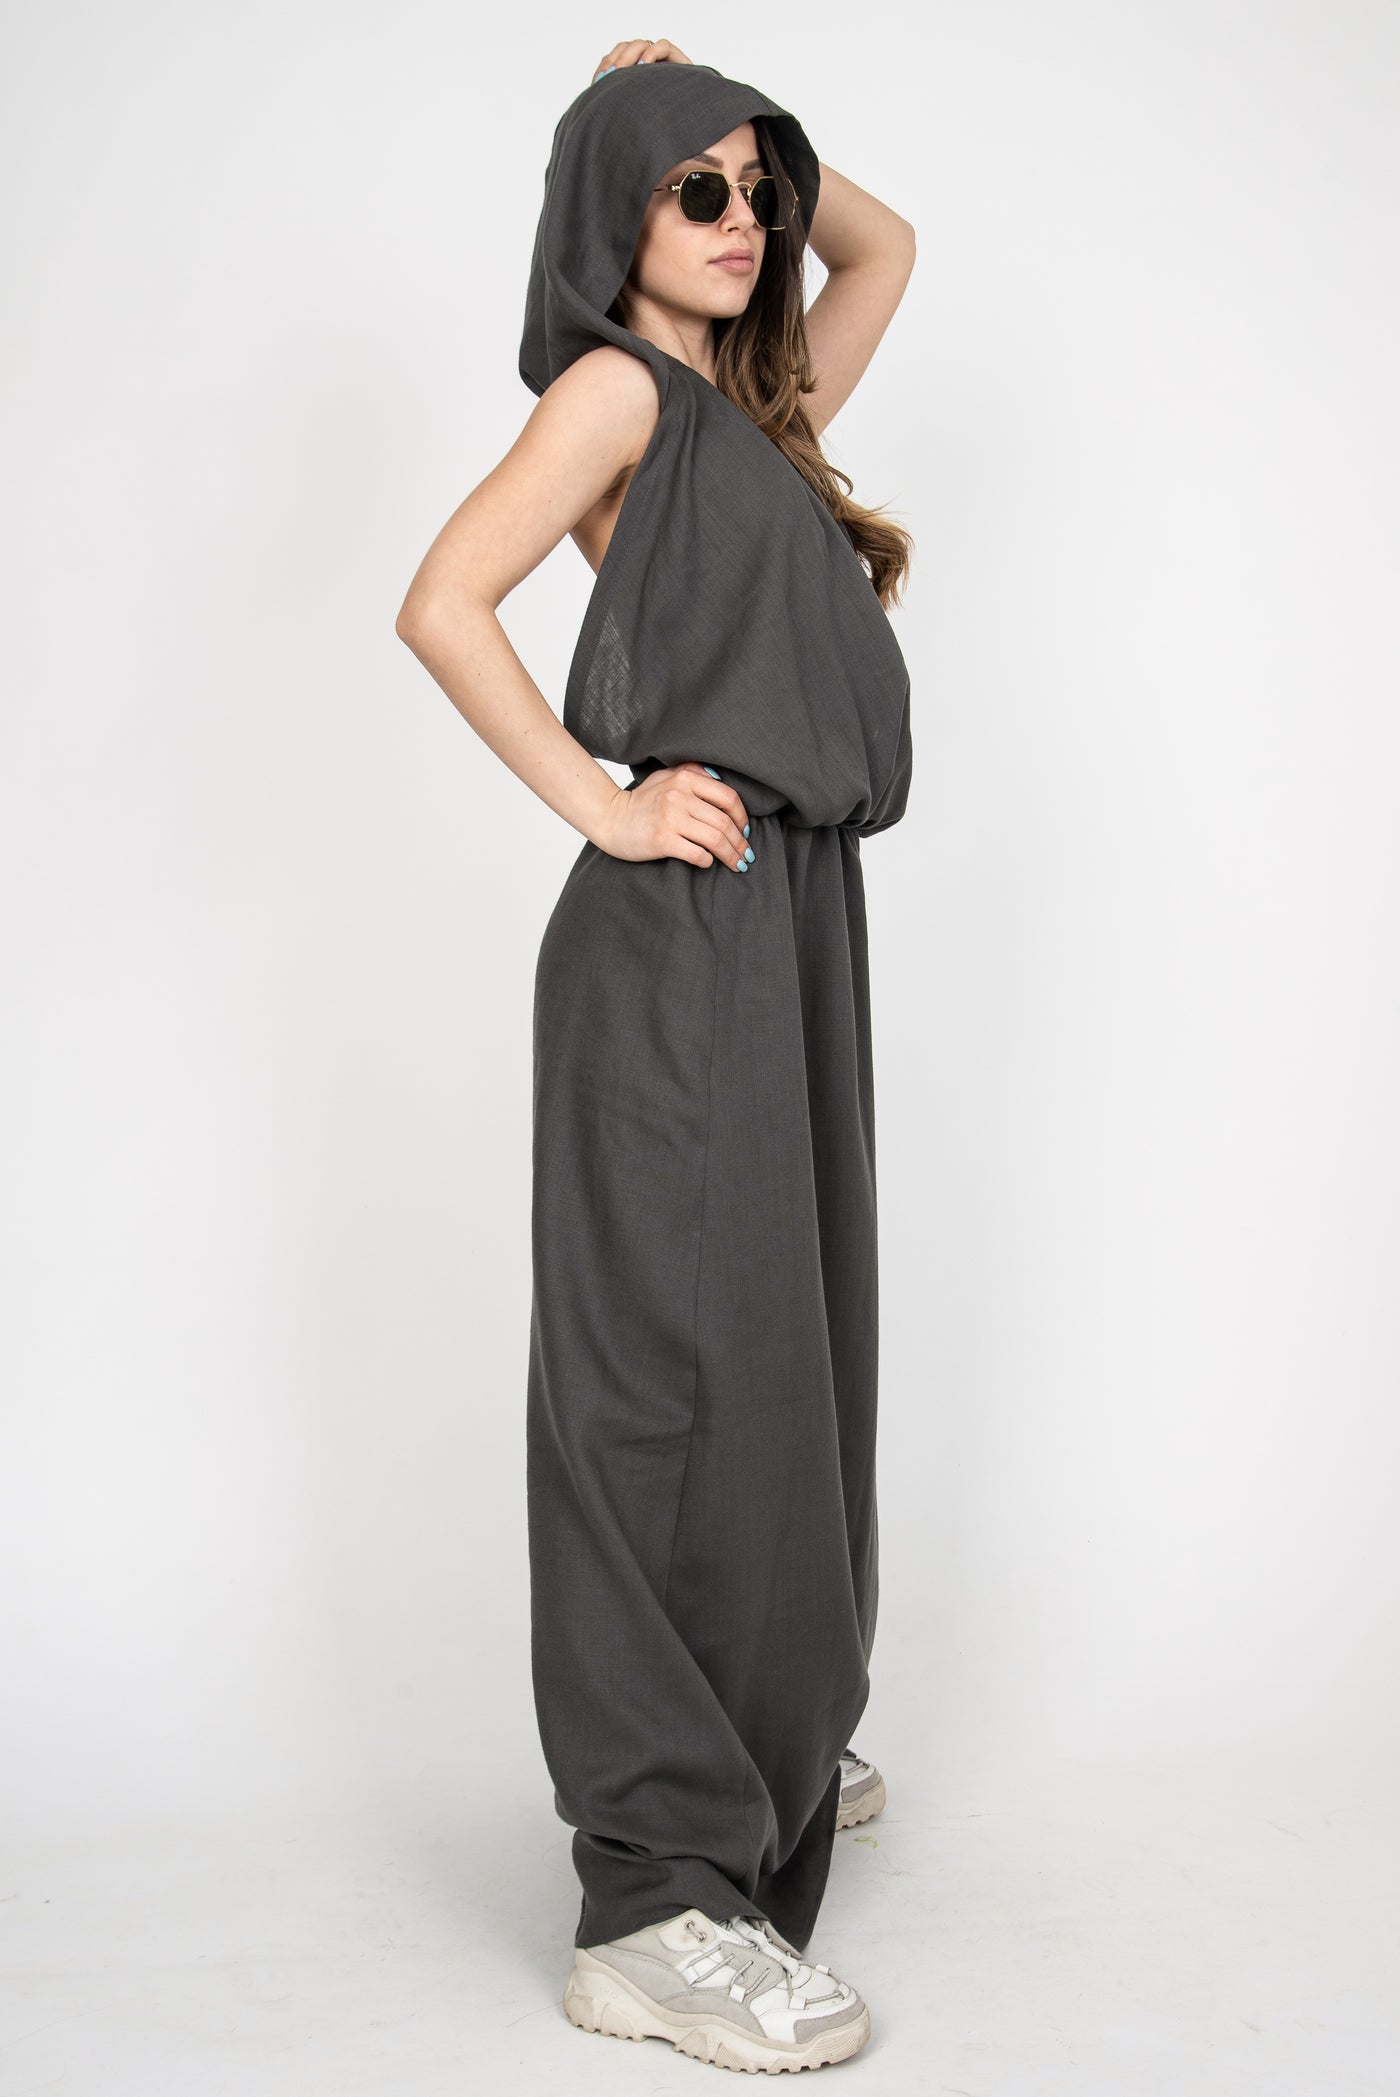 Grey hooded linen dress with open back AE271